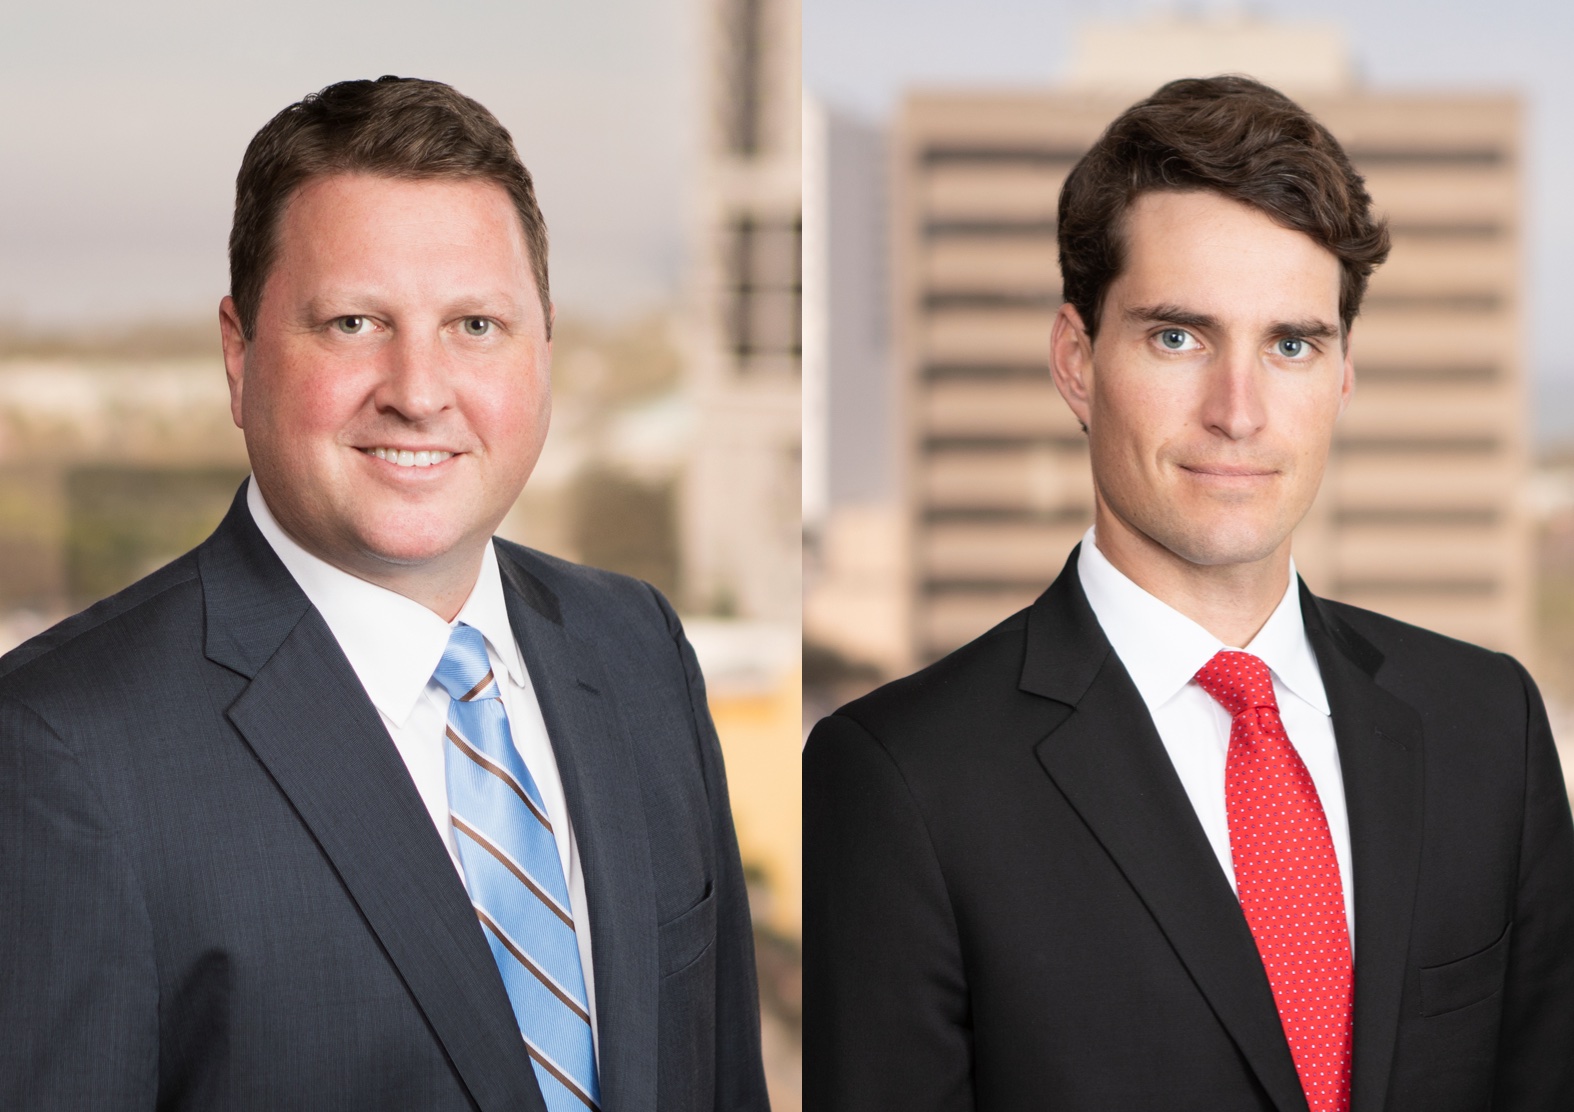 L to R: Jarrod Malone and Brandon Taaffe; image courtesy of Shumaker Law Firm.